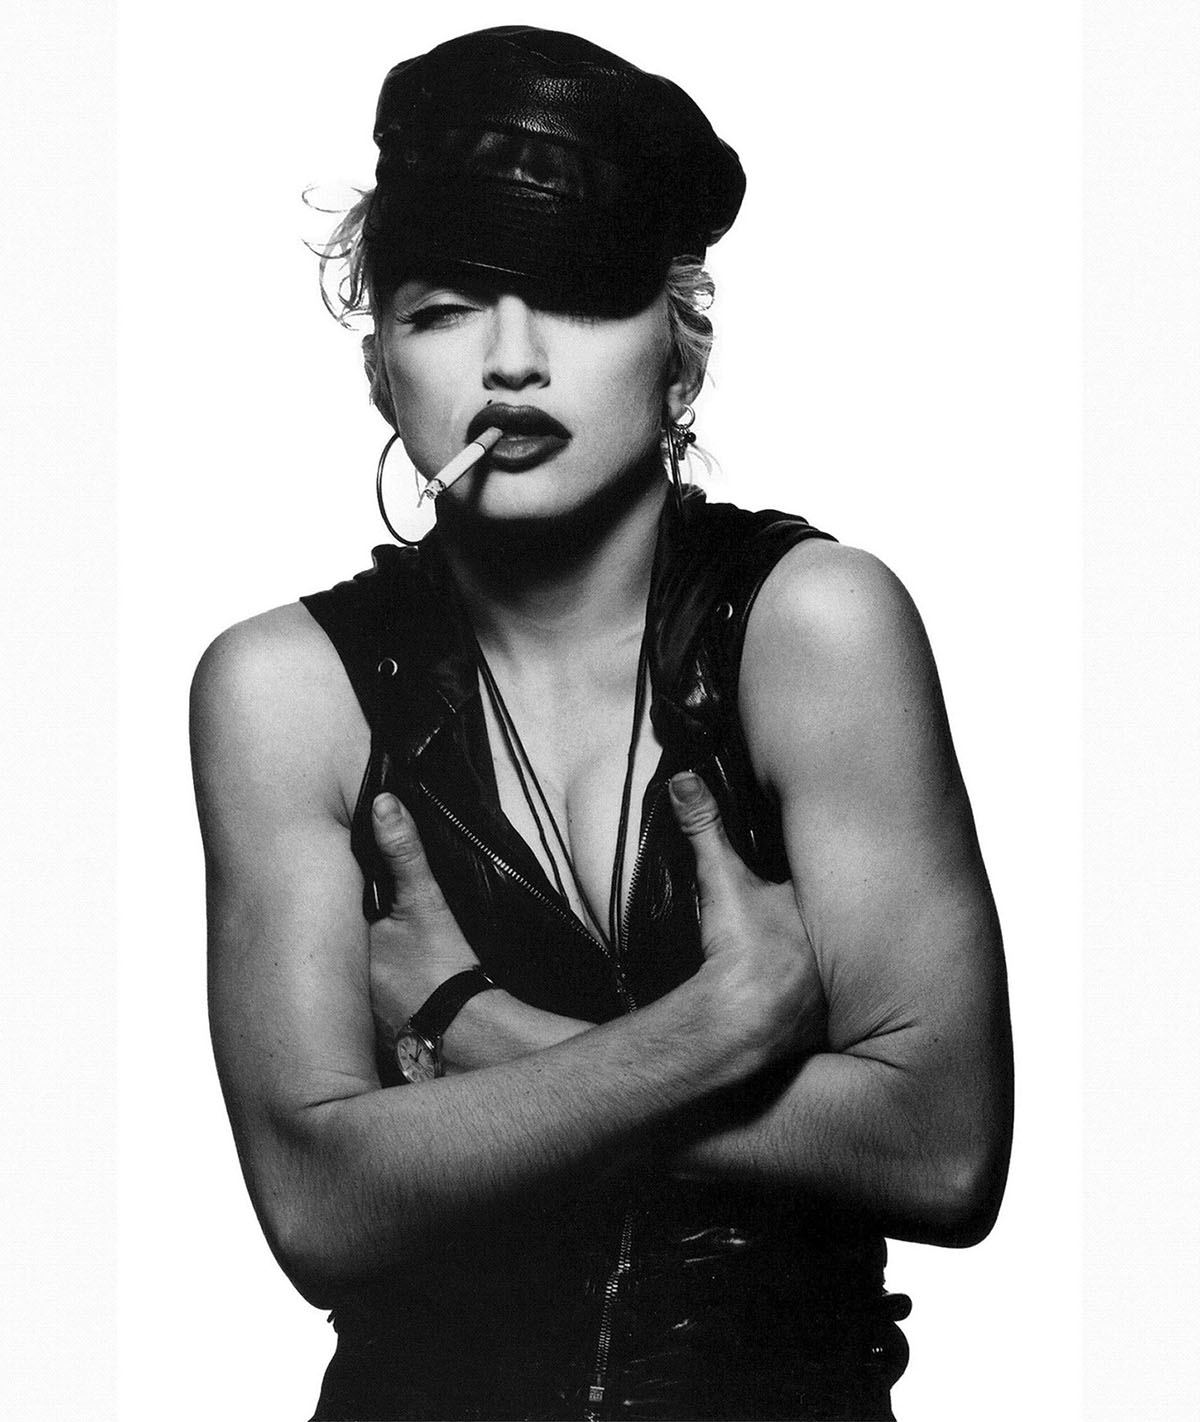 Madonna photographed by Patrick Demarchelier for Justify My Love 1990